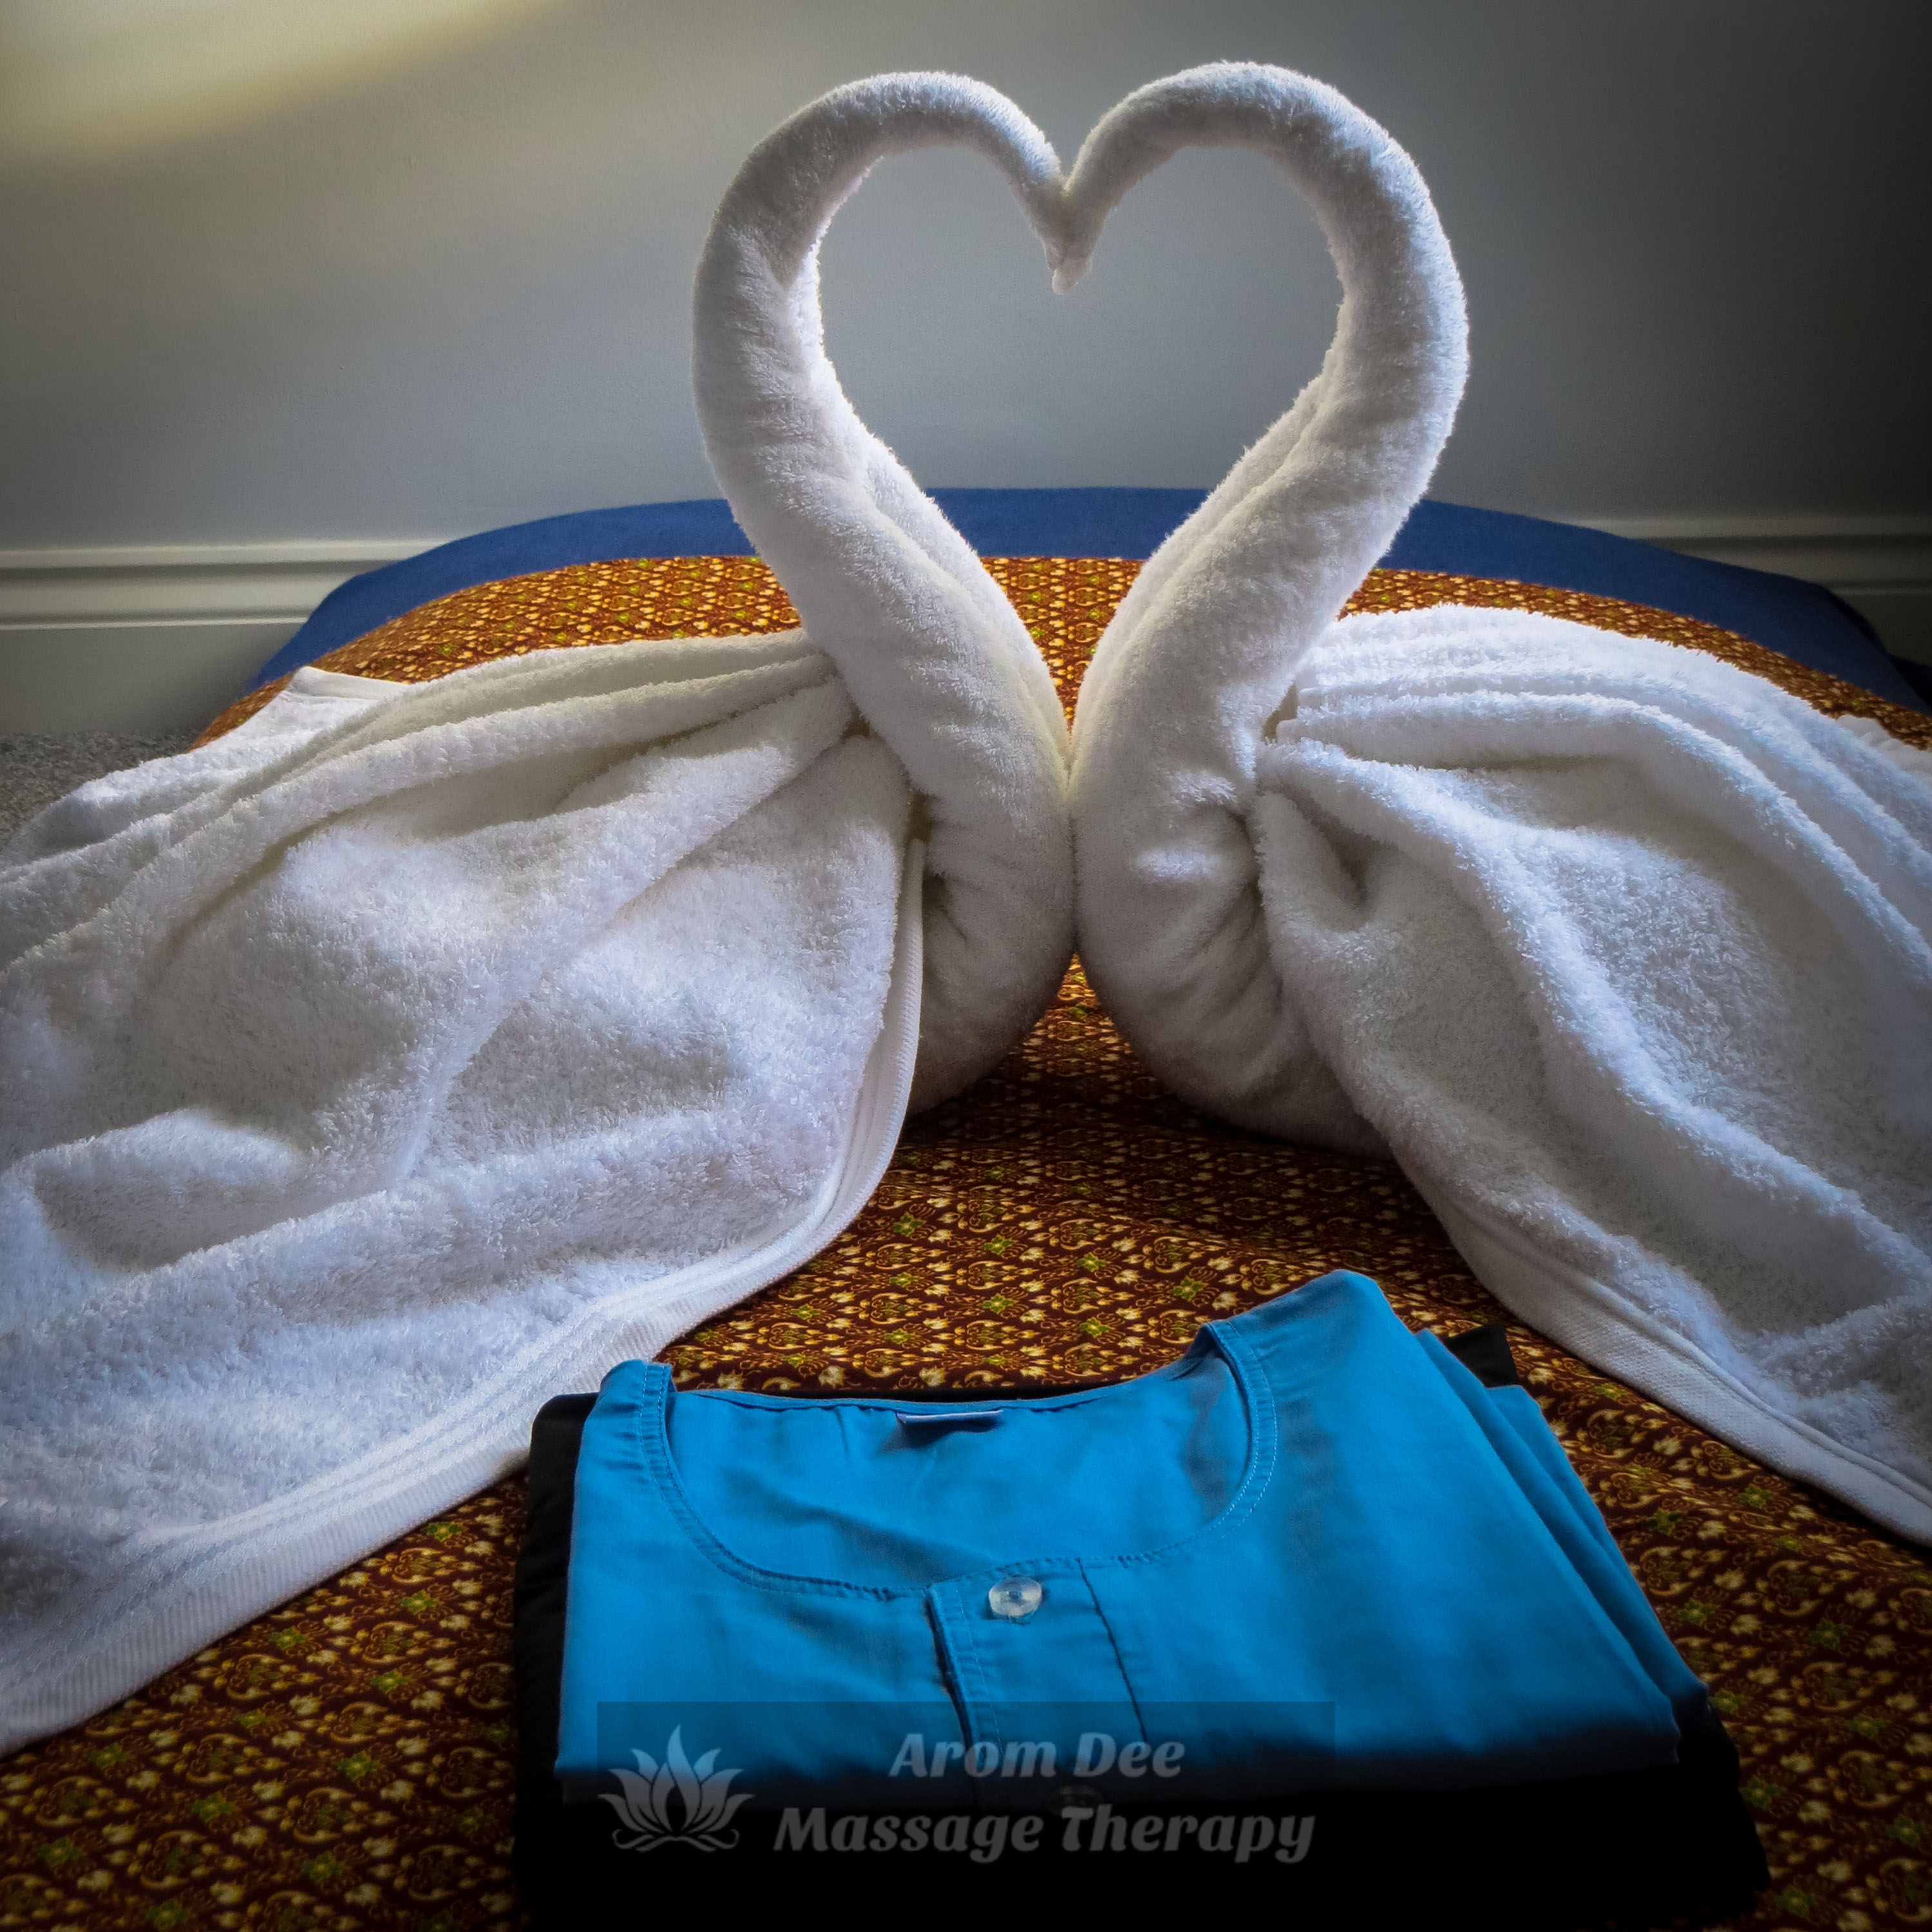 Folded client's pyjamas and two towels shaped as swans in heart on Thai massage mattress pad on floor